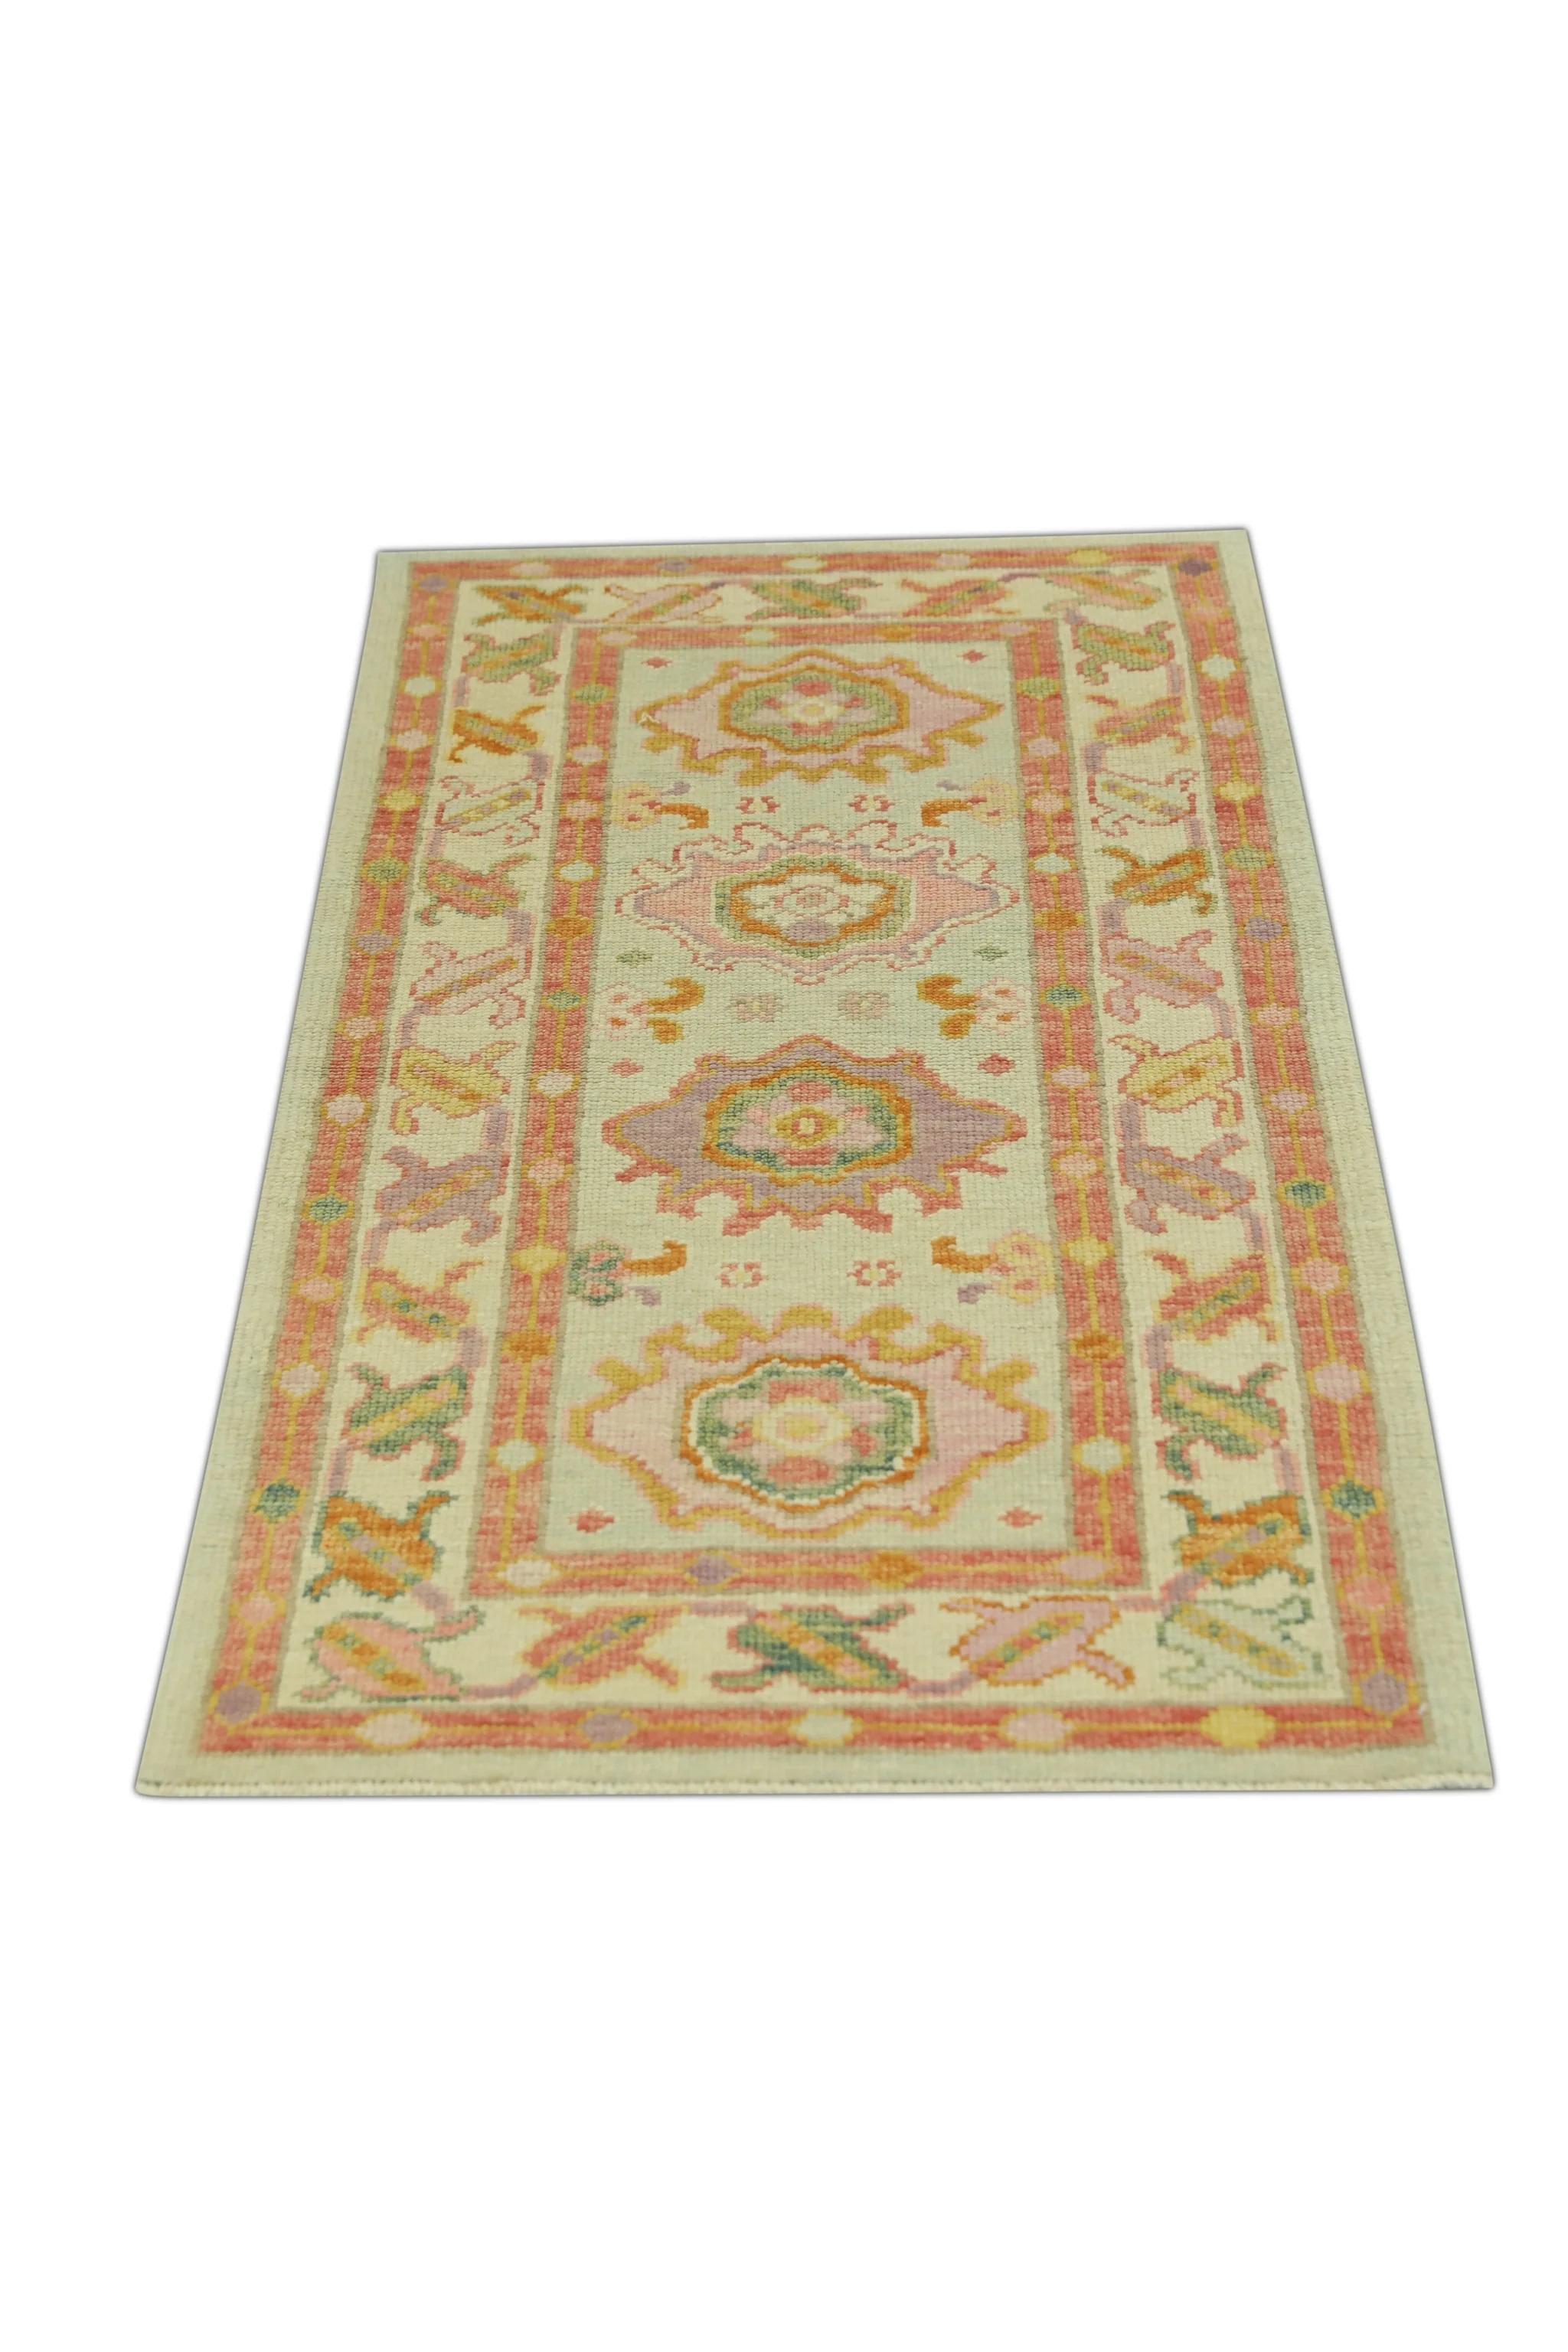 Contemporary Pink Multicolor Handwoven Wool Turkish Oushak Rug 2'9